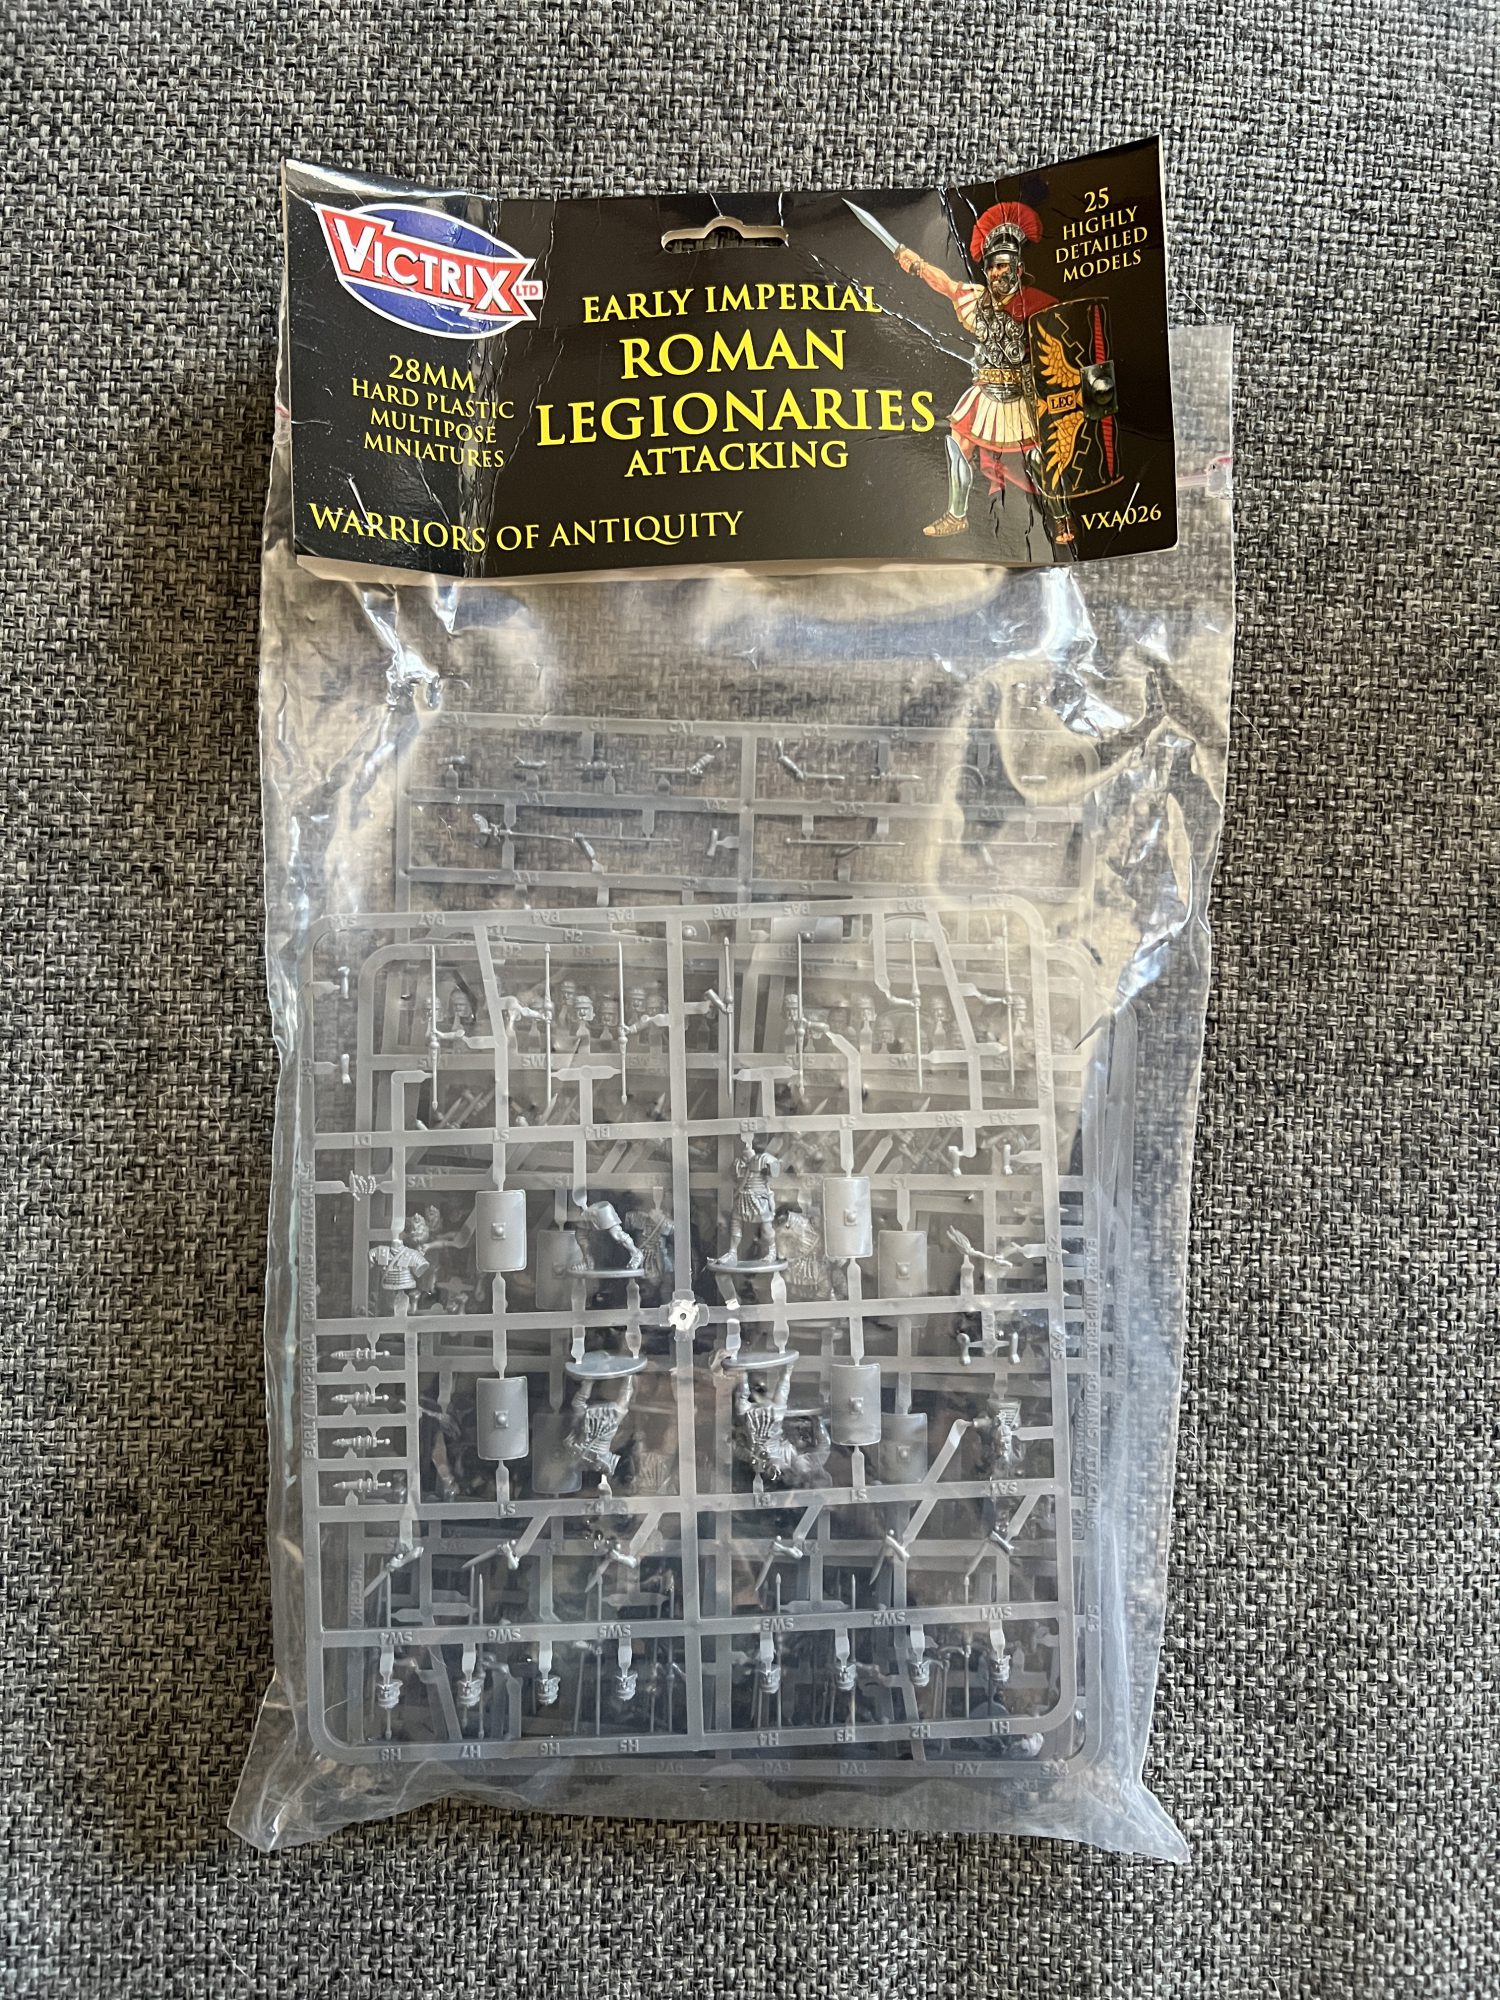 A package of Roman Legionnaires miniatures from Victrix Miniatures.